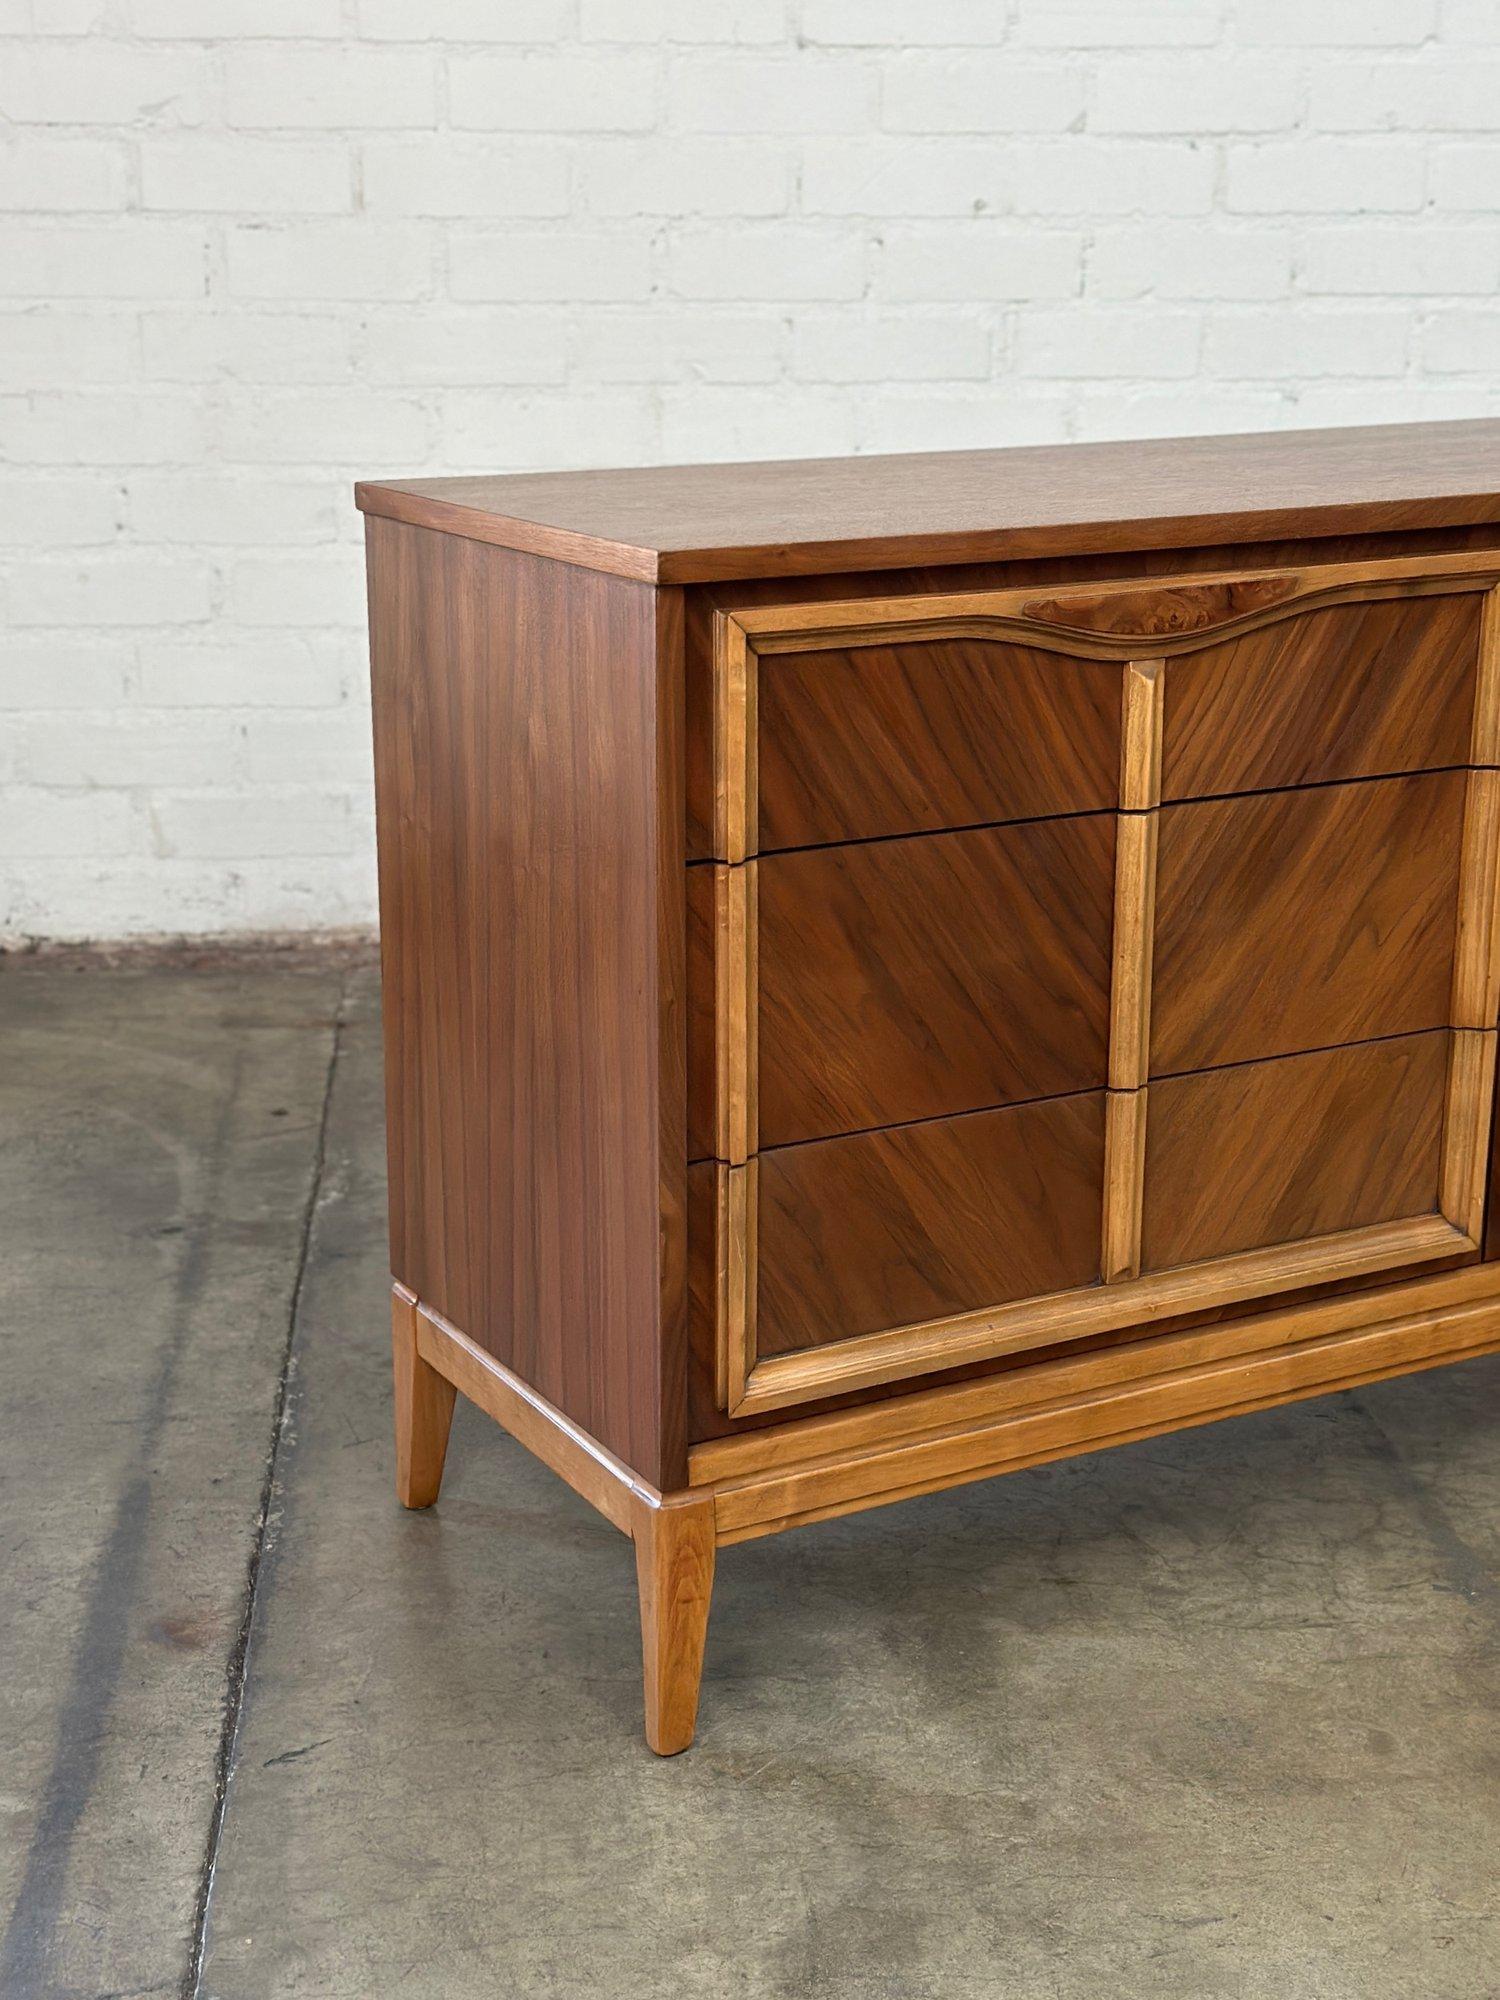 W56.5 D18.5 H31.25

Fully restored mid century dresser in great condition. Item features sculpted trim and small burlwood inlay on the top of drawers. Dresser is structurally sound and fully functional. 